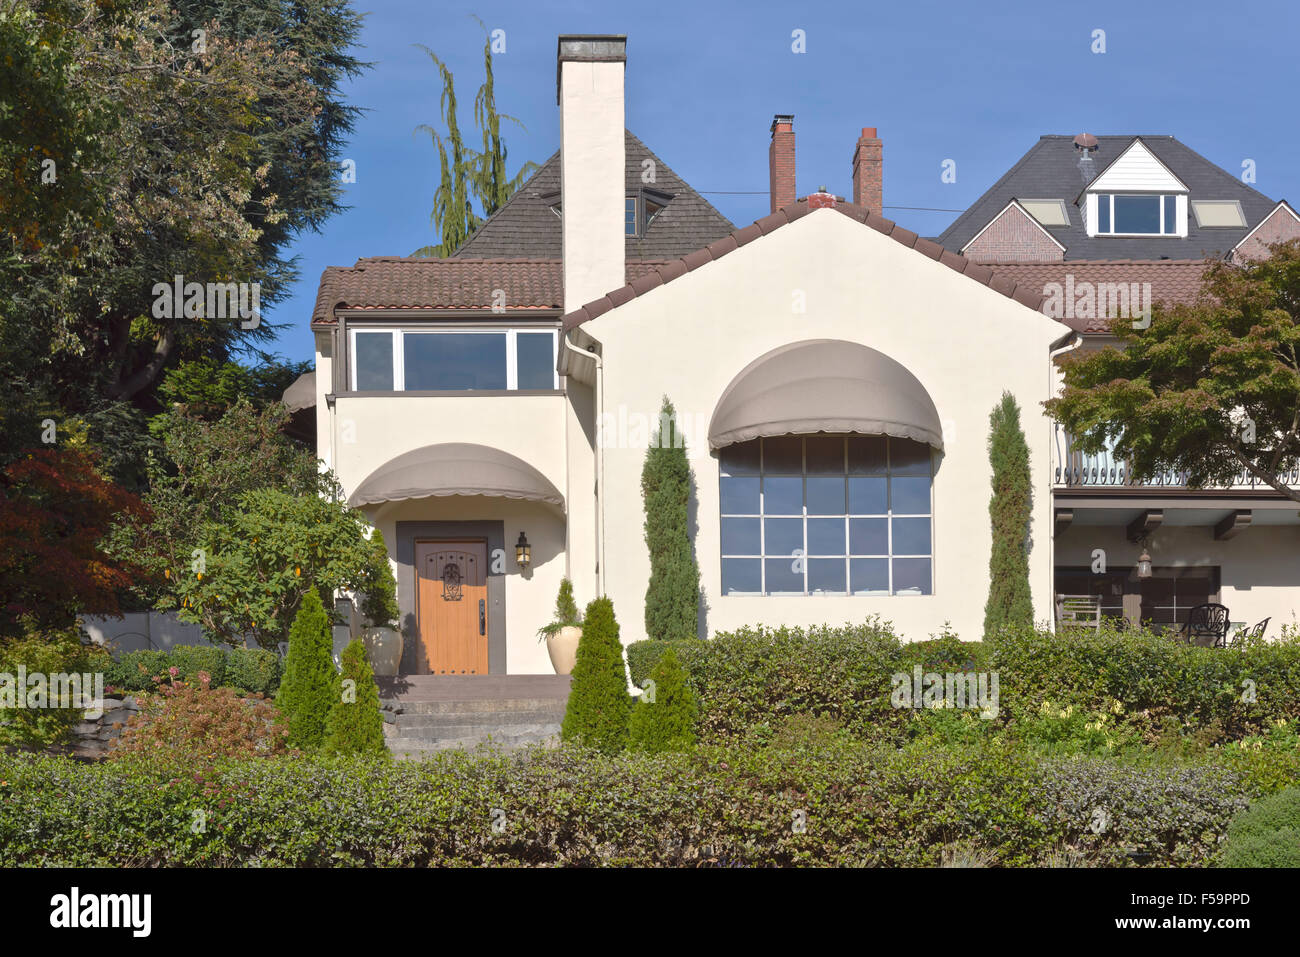 Residential homes in Queen Ann's area in Seattle Washington. Stock Photo